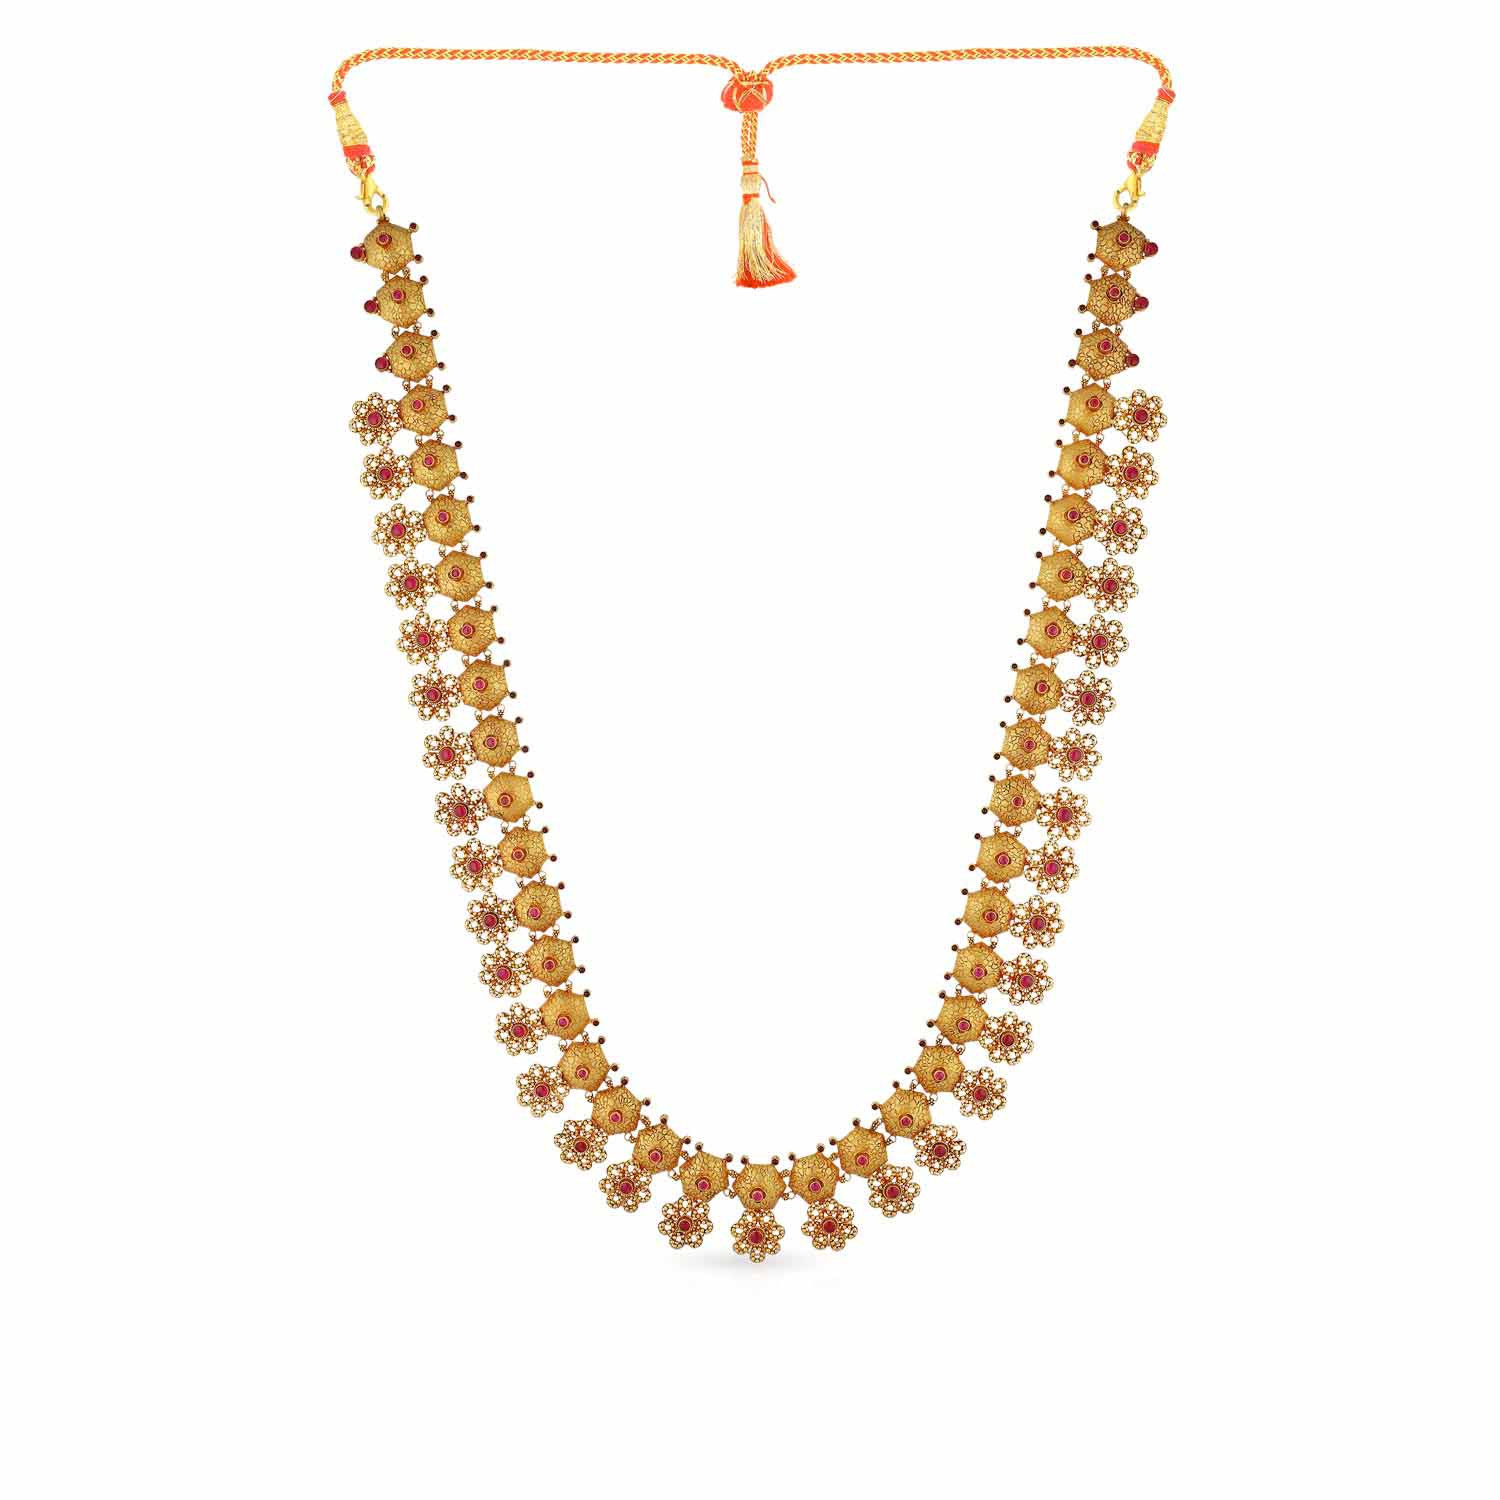 Buy Gold Inspired Light Weight Mango Design Kerala Necklace Bridal Jewelry  for Wedding